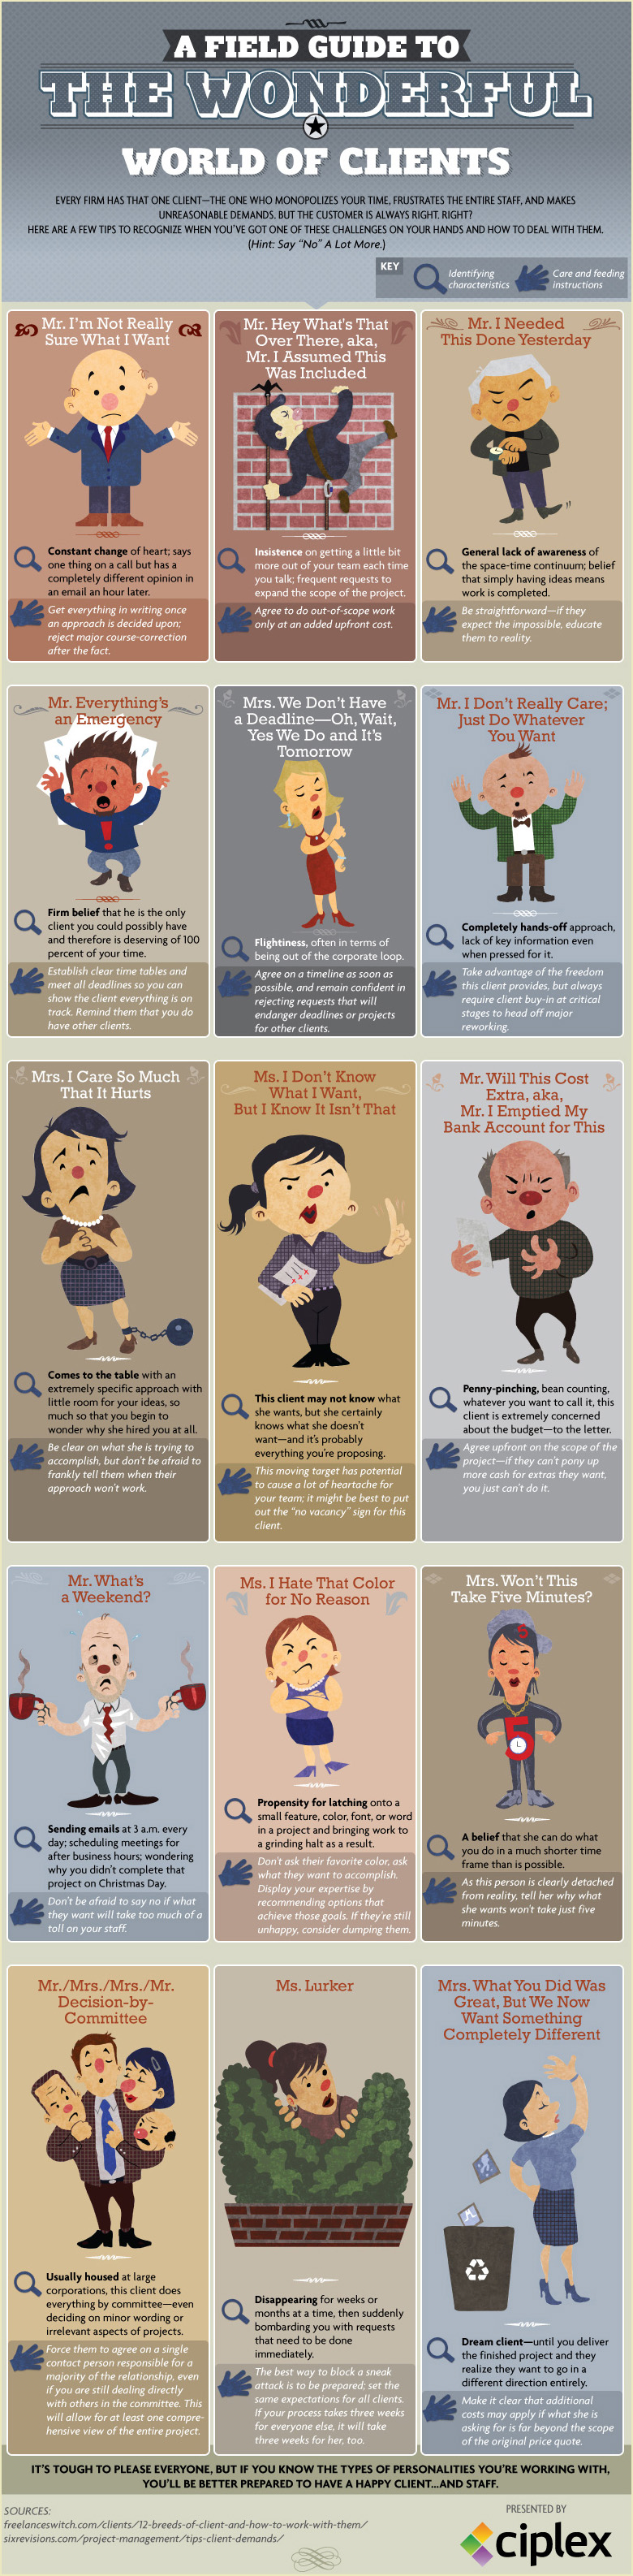 Top 15 Ways To Deal With Difficult Clients